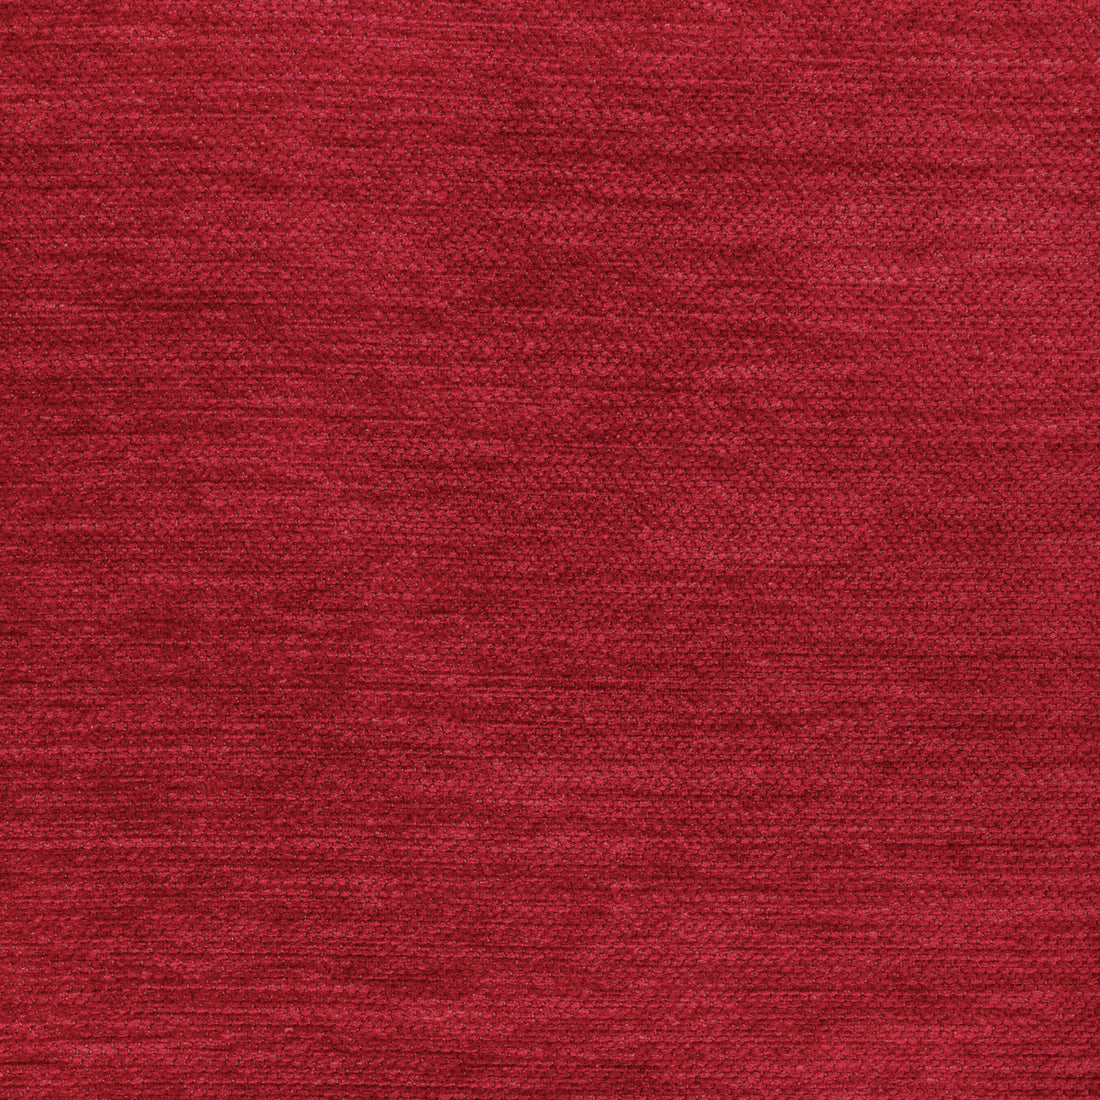 Cognin Texture fabric in red color - pattern 8022126.19.0 - by Brunschwig &amp; Fils in the Chambery Textures III collection